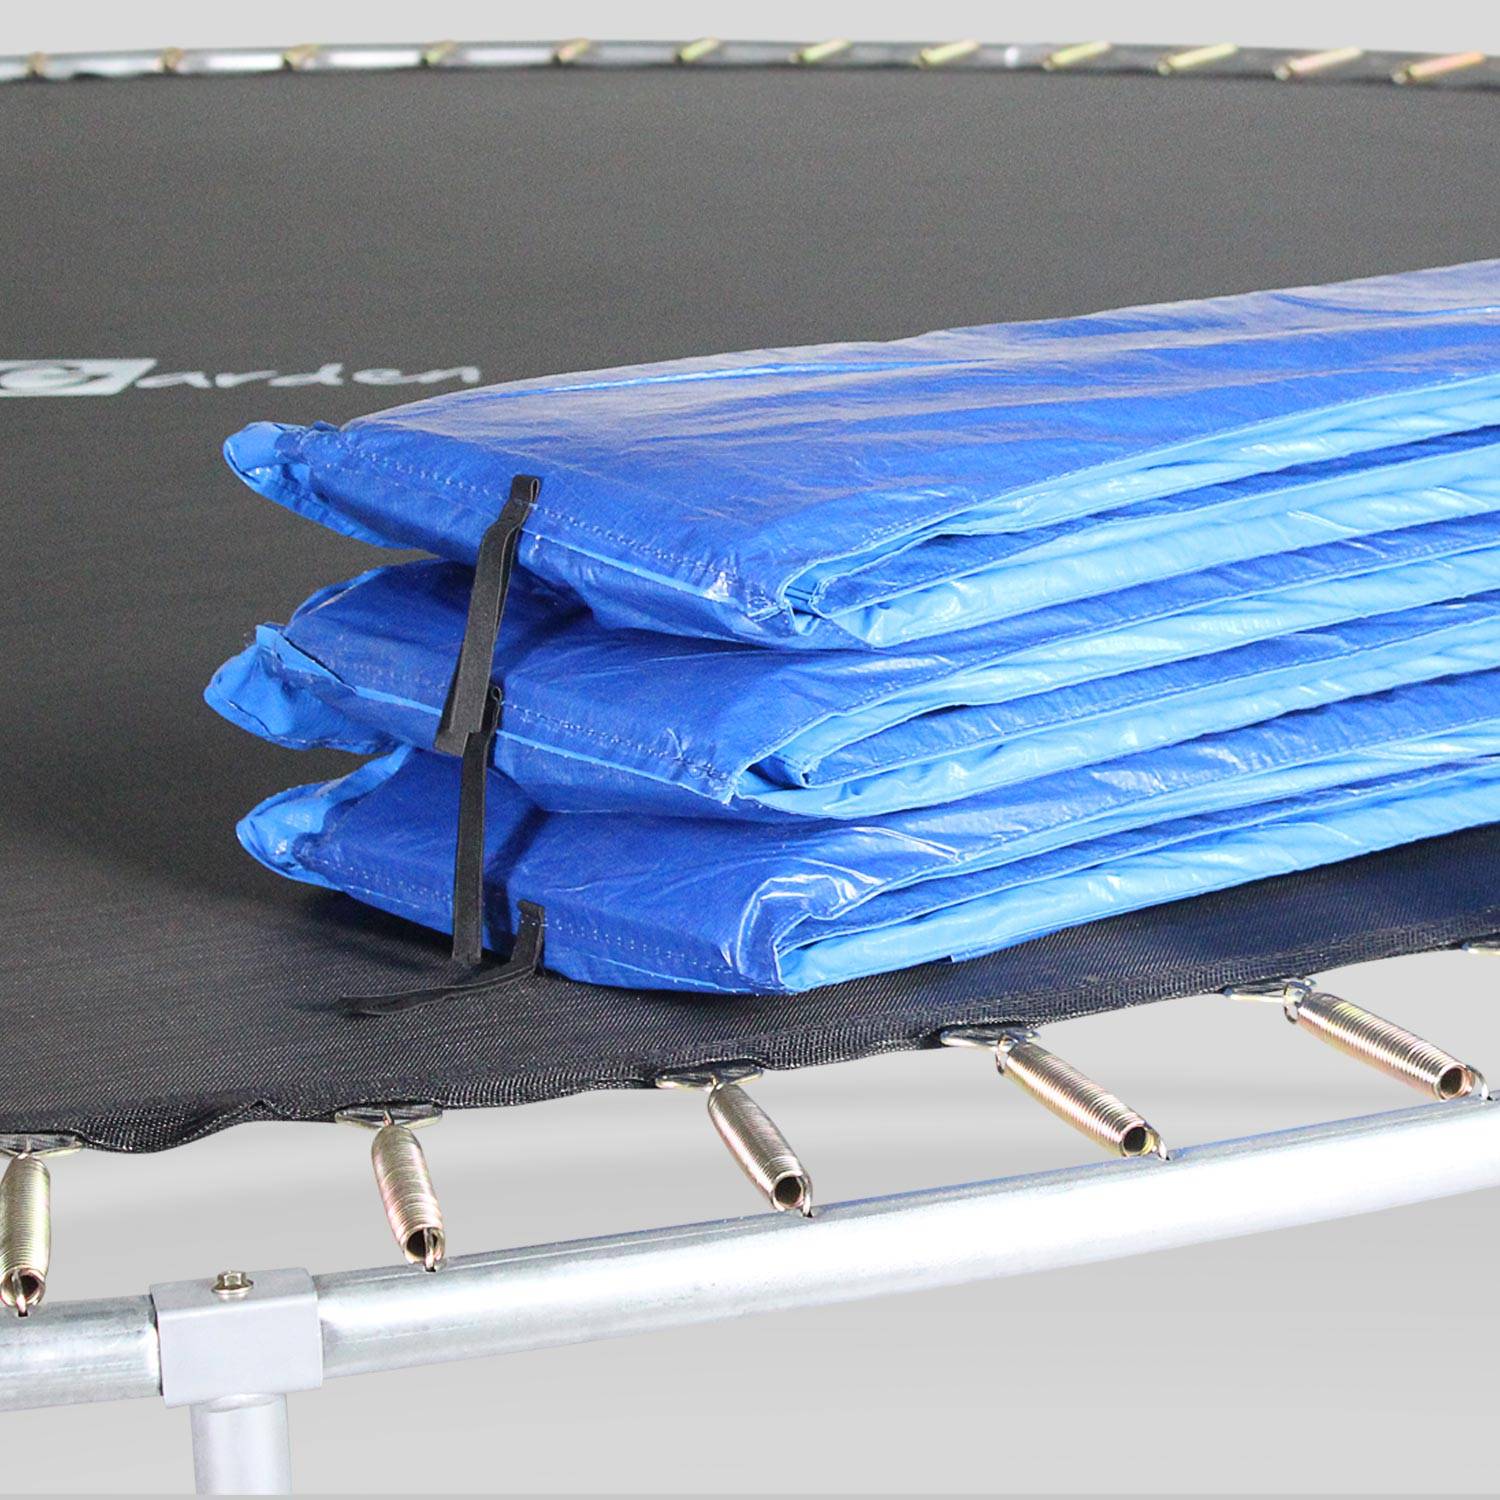 Protective spring cover for trampoline 460cm - 22mm - Blue,sweeek,Photo2